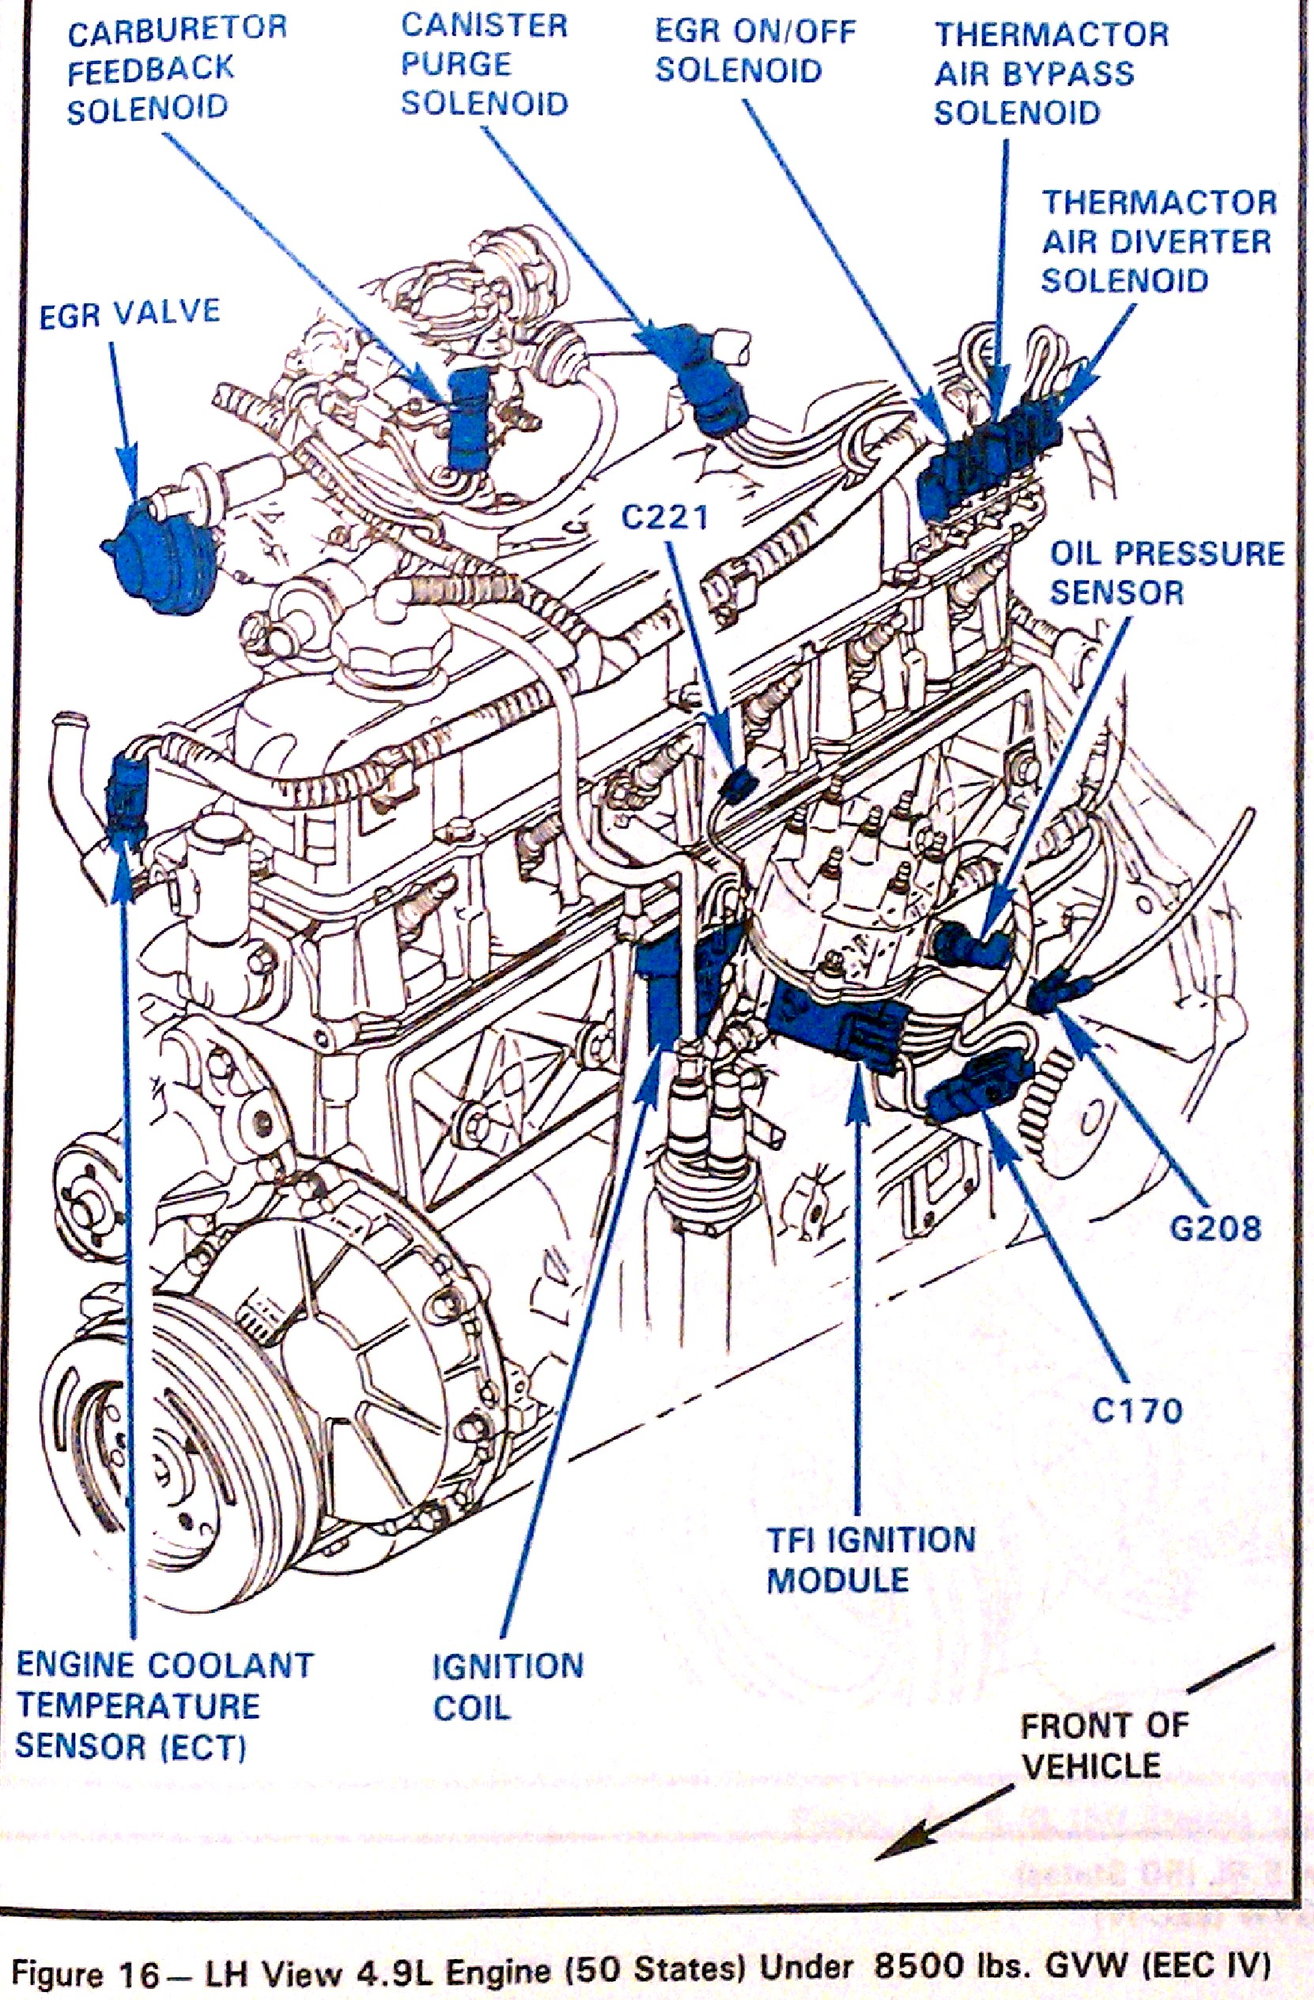 1985 ford f150 300 inline 6 smog help - Ford Truck ... 4 9l ford engine diagram 